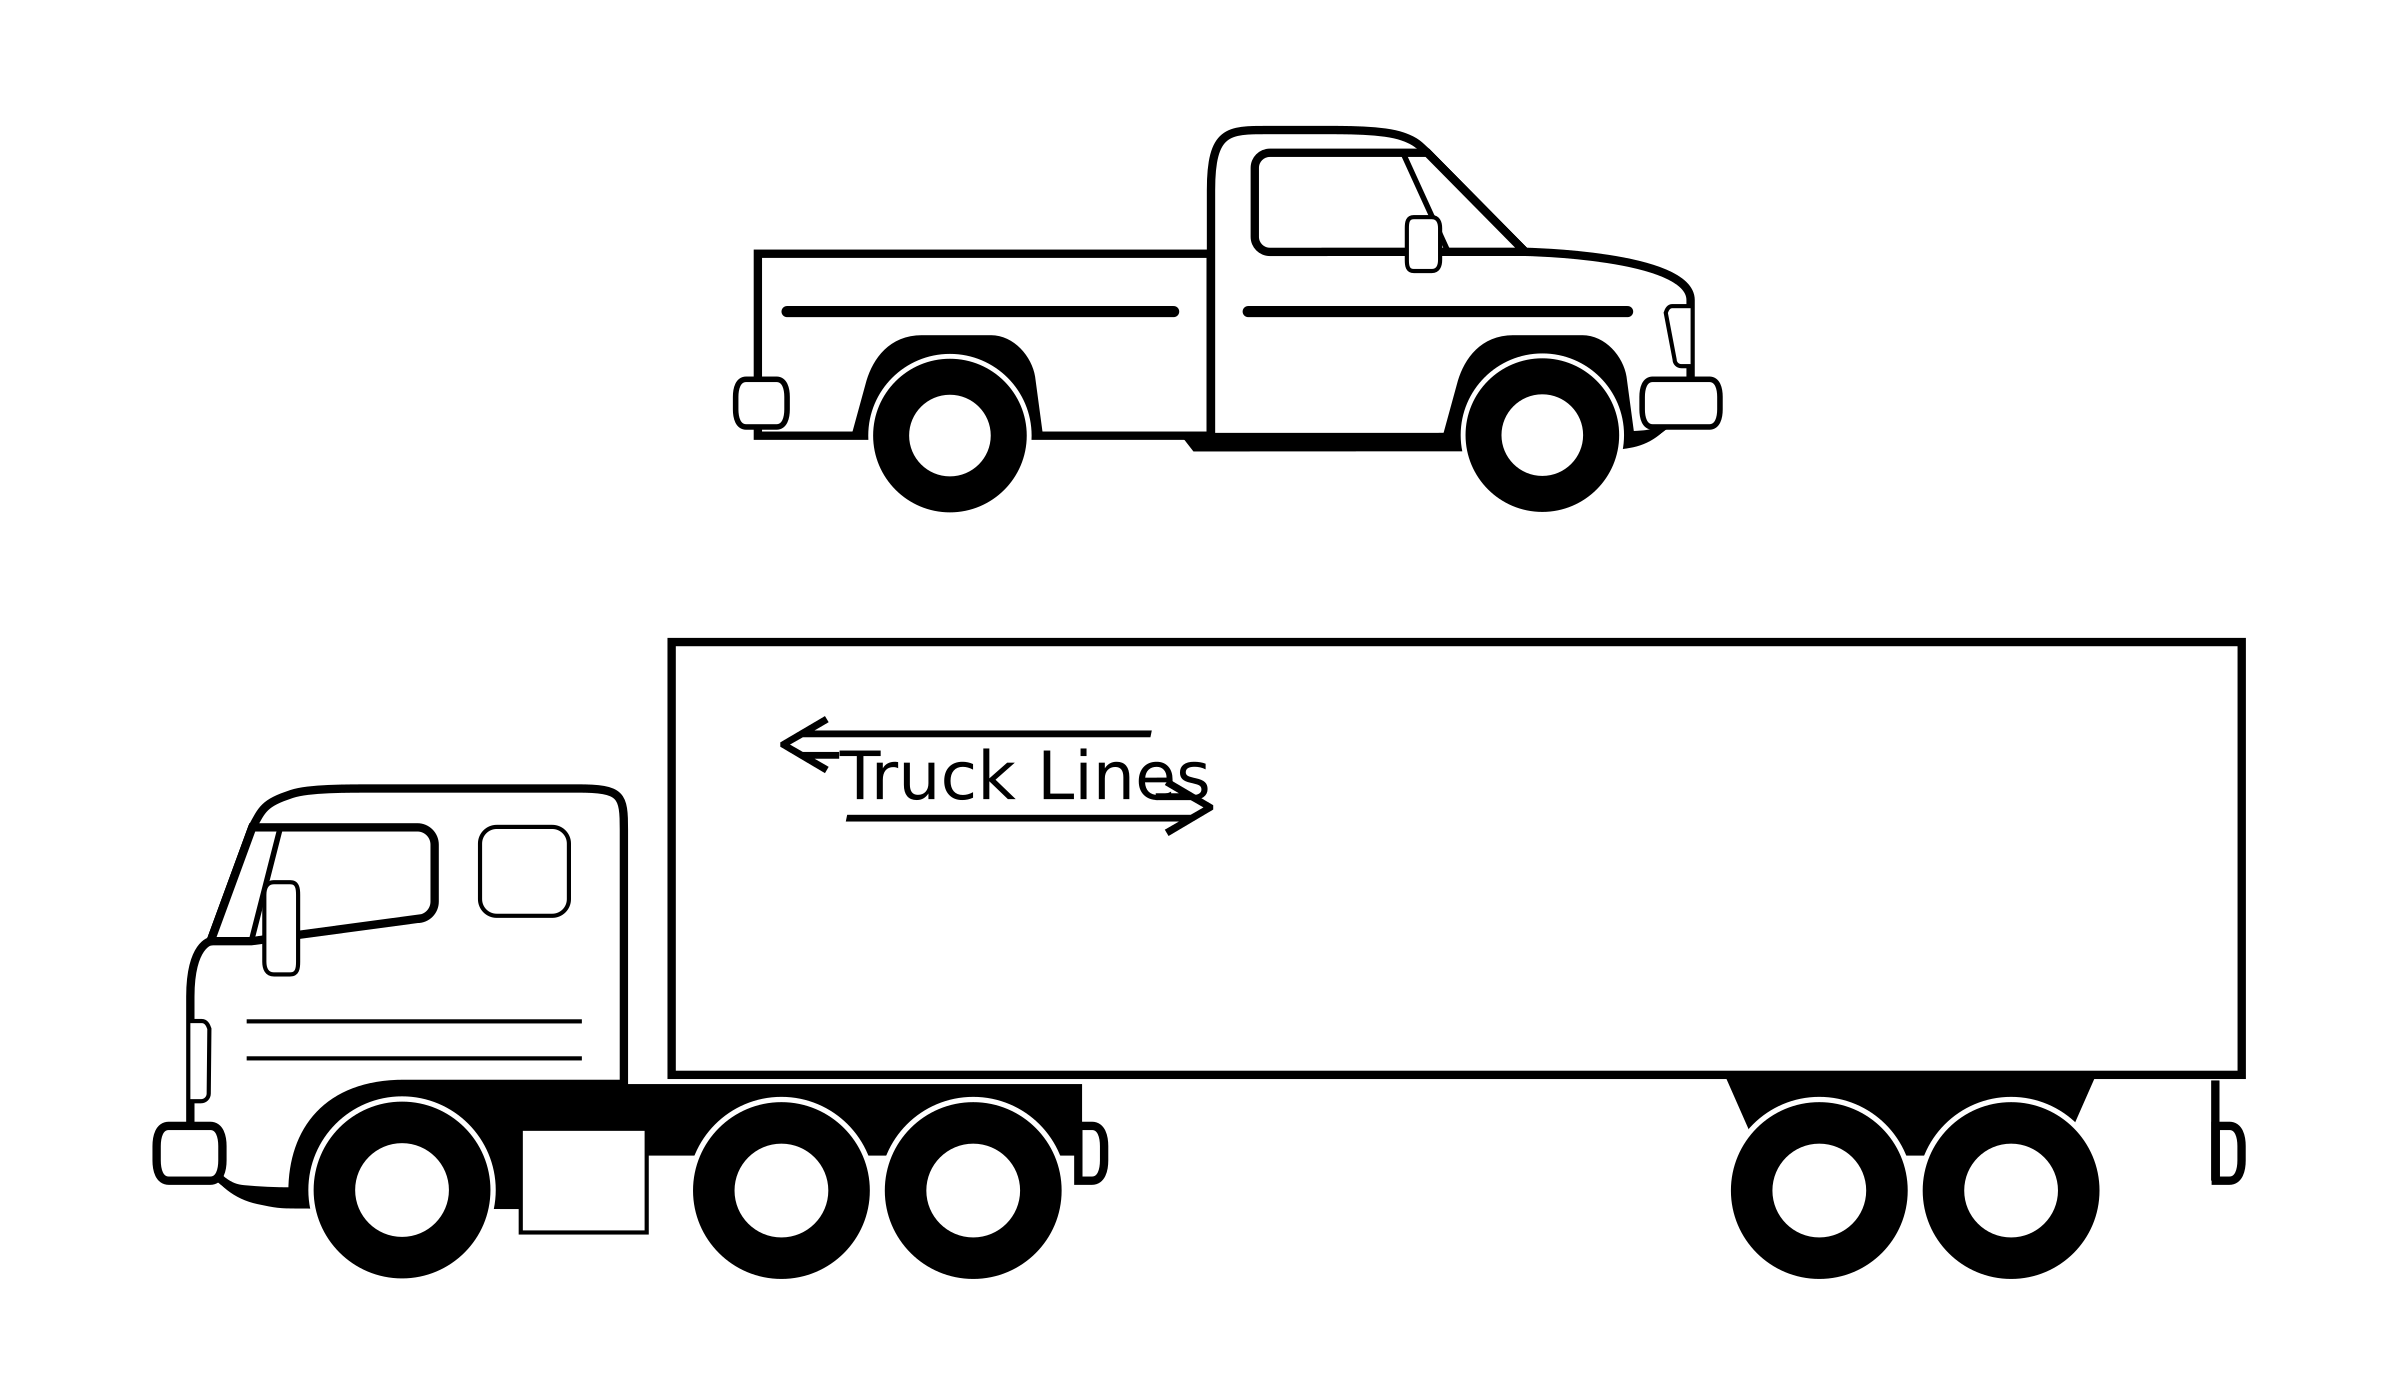 Pickup Truck Clipart Outline  www.pixshark.com  Images Galleries With A Bite!